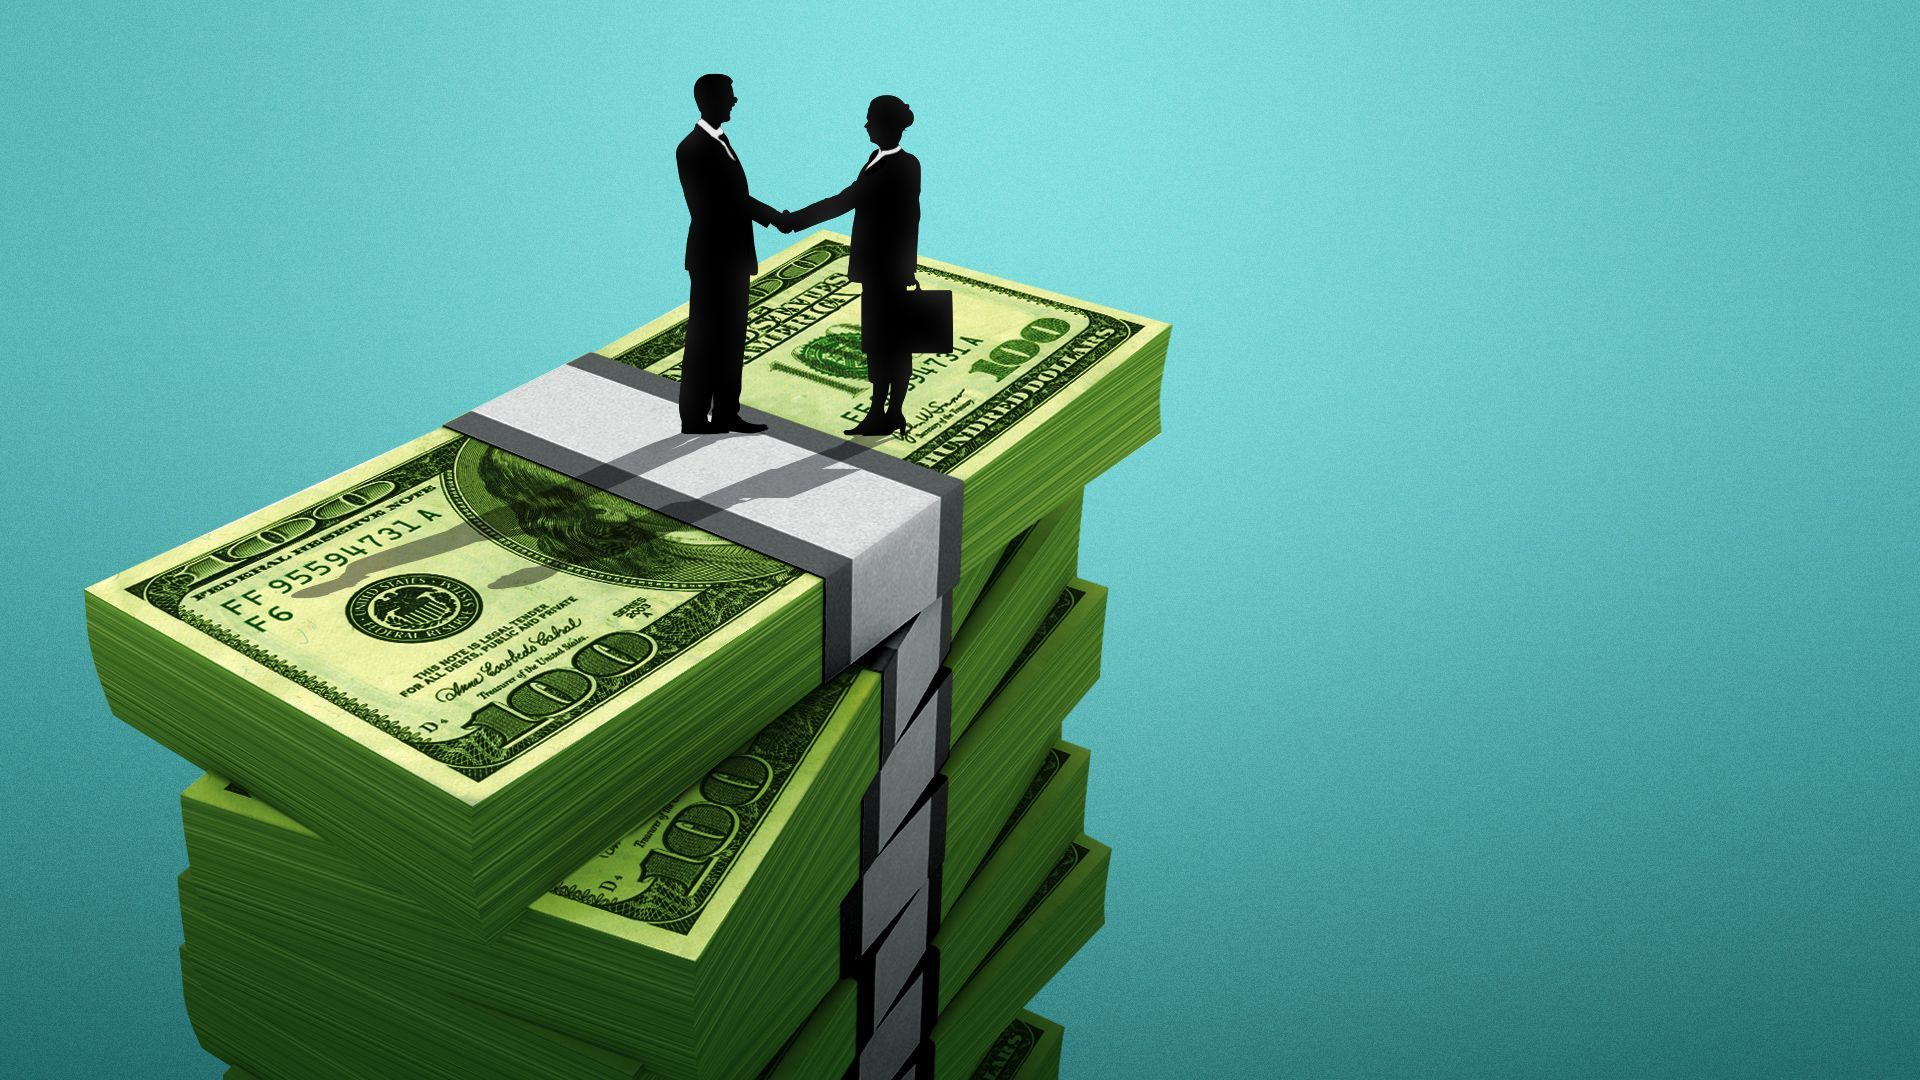 Illustration of two people shaking hands on a giant stack of money. 